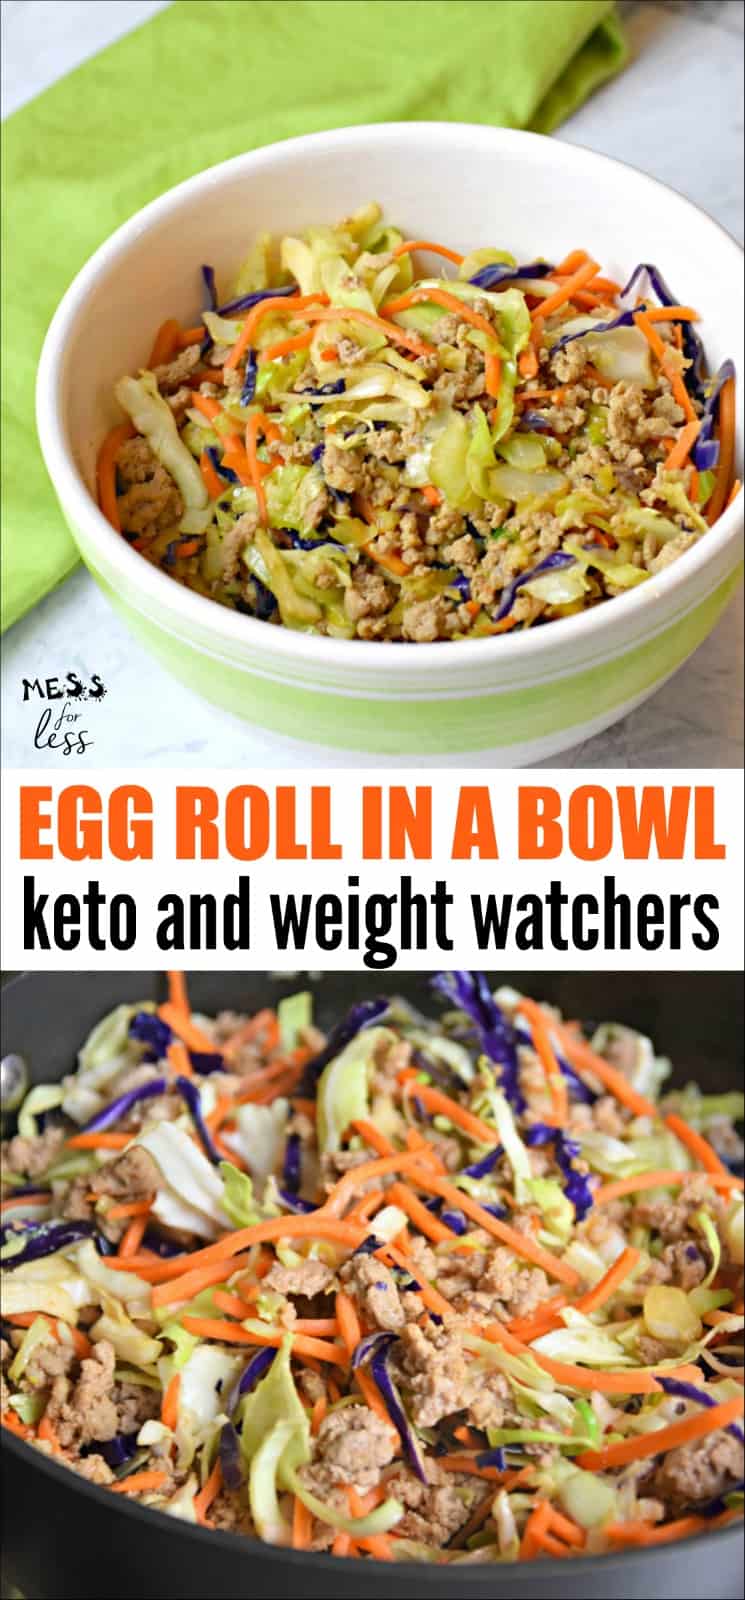 This Keto Egg Roll in a Bowl is one of my favorite low carb meals. All of your favorite egg roll flavors in this Keto Crack Slaw. Perfect for Keto or Weight Watchers diets. 